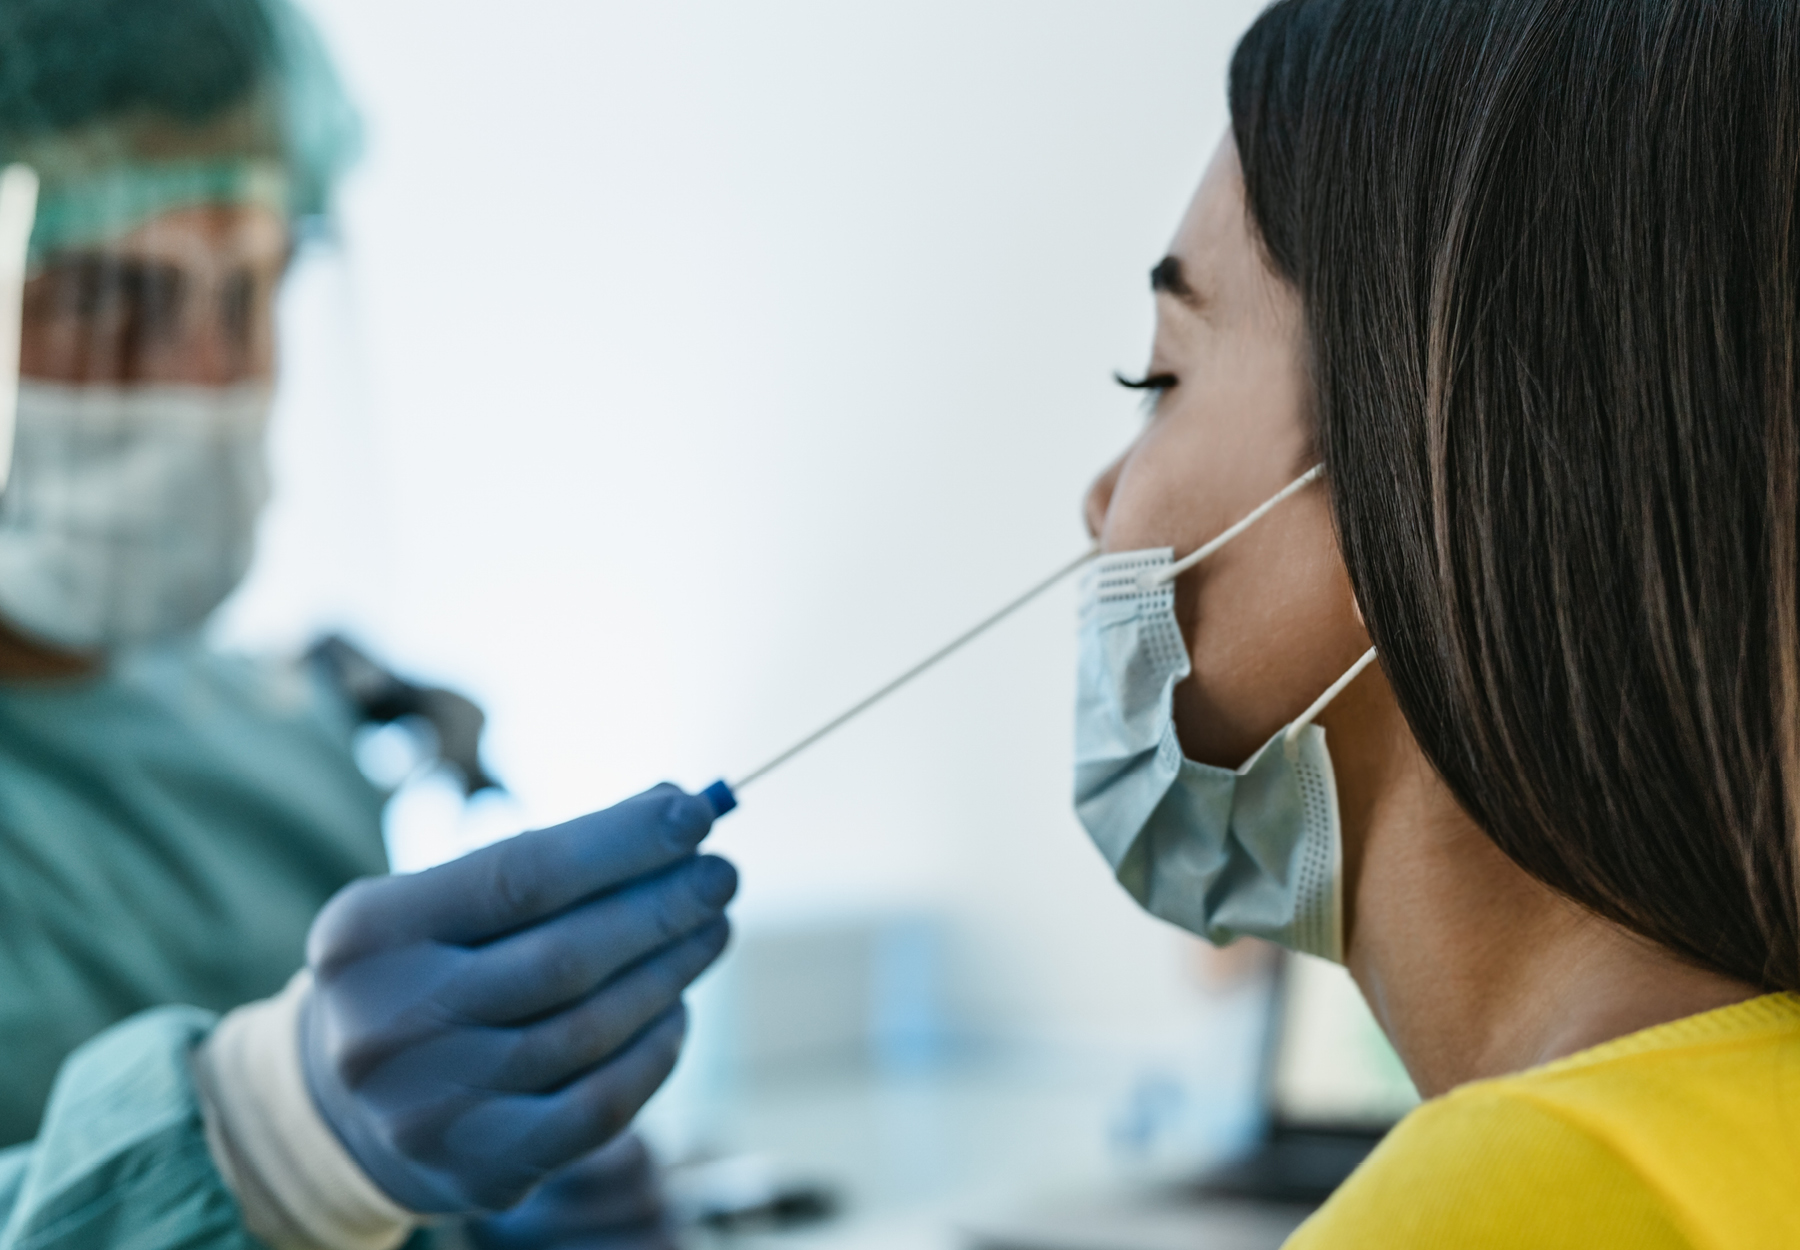 Closeup of healthcare worker in full PPE conducting a nasal swab on a woman for COVID-19 testing. Stock image.